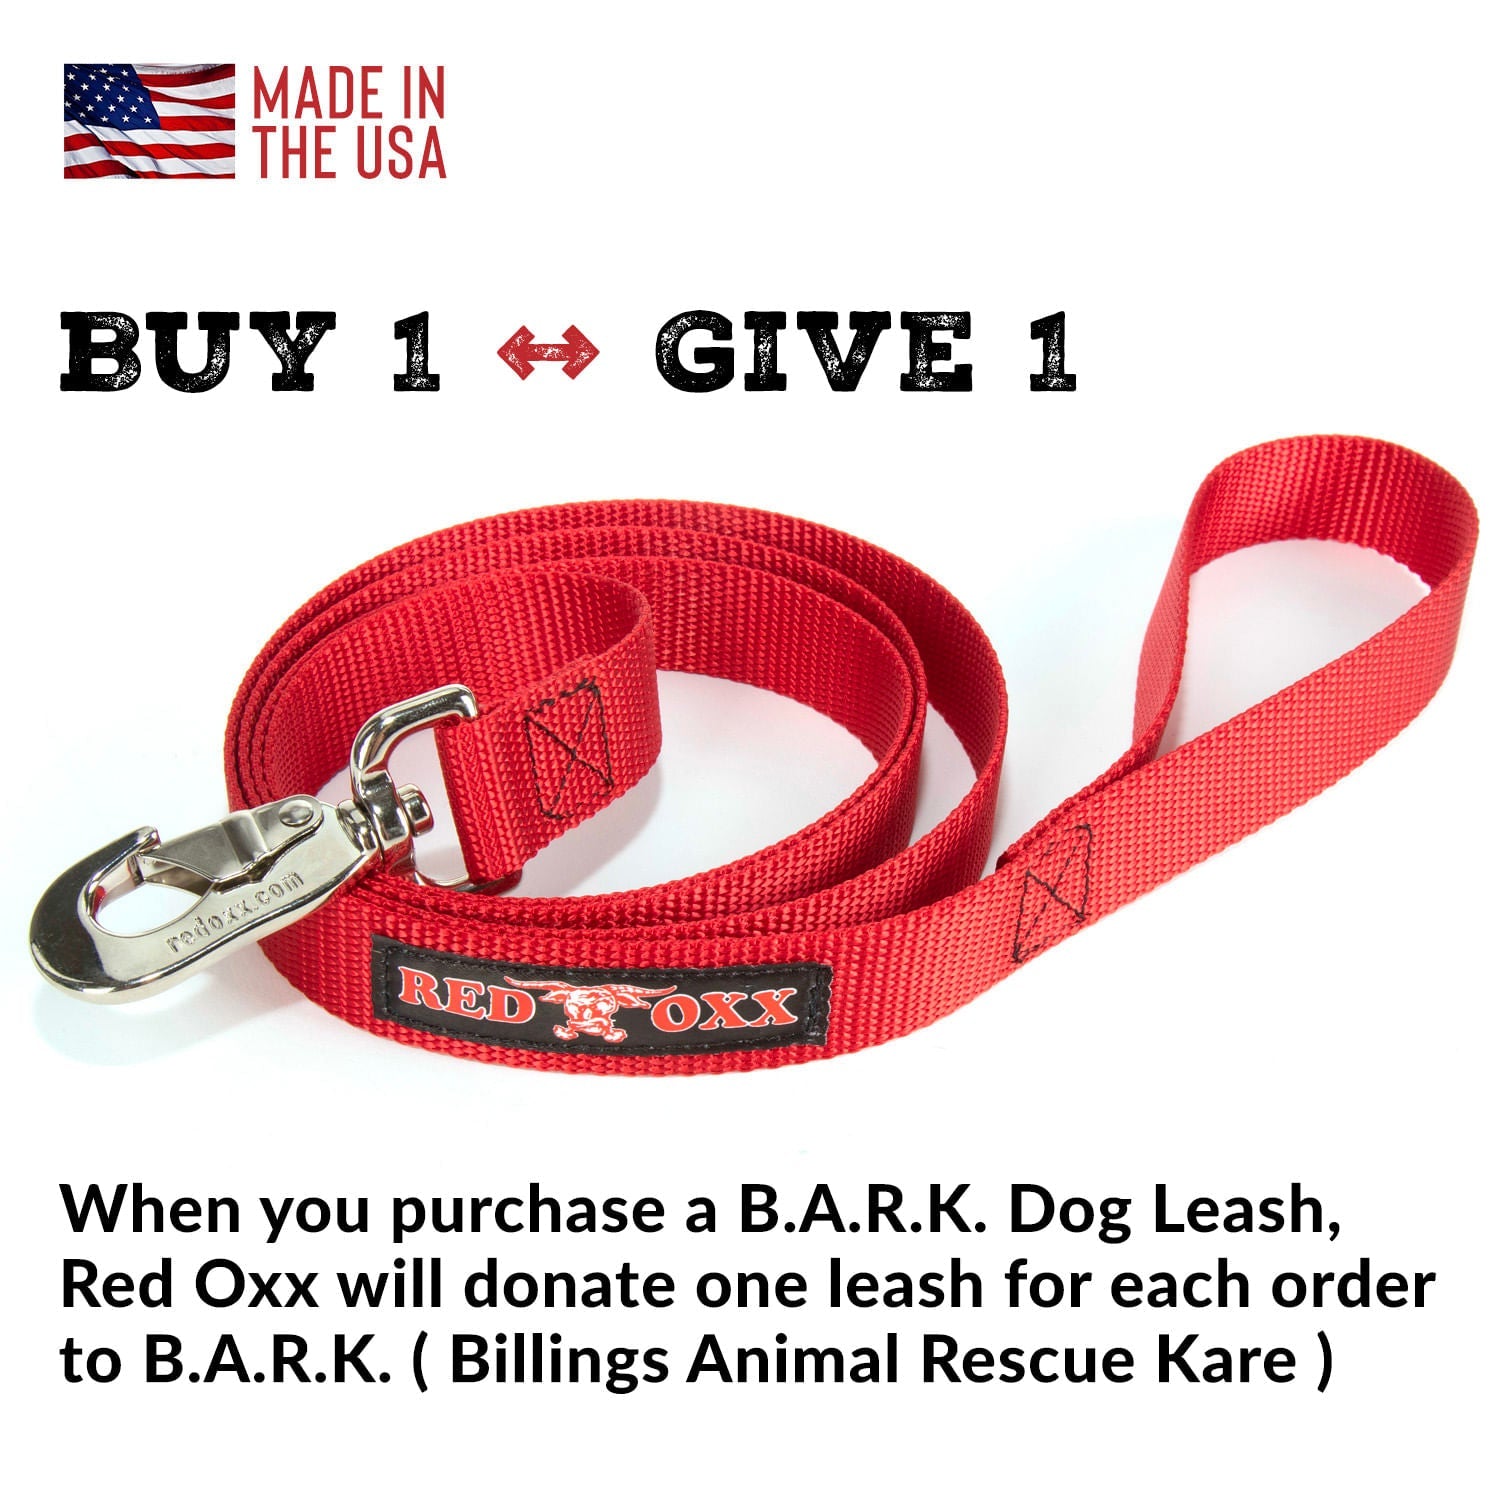 Red Dog Leash with Swivel clip and hand loop.  When you purchase  a BARK dog leash.  Red Oxx will donate one leash to Billings Animal Rescue Kare